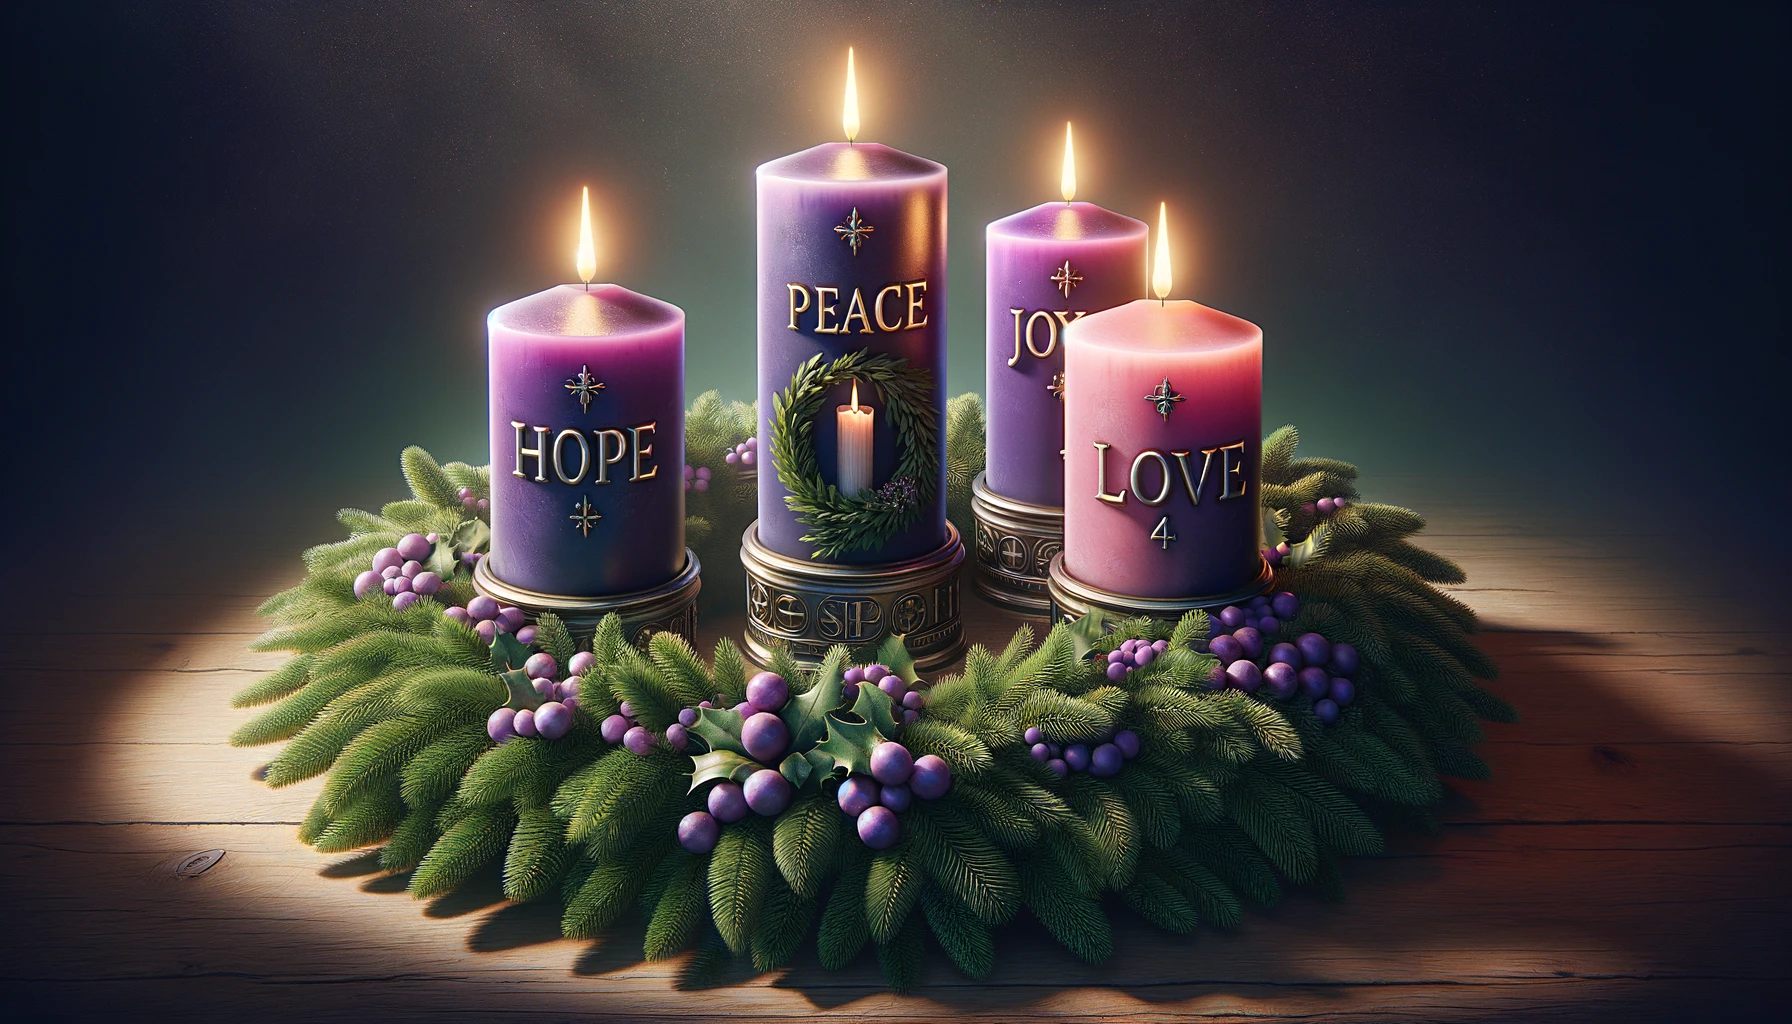 What Does Each Advent Candle Mean?